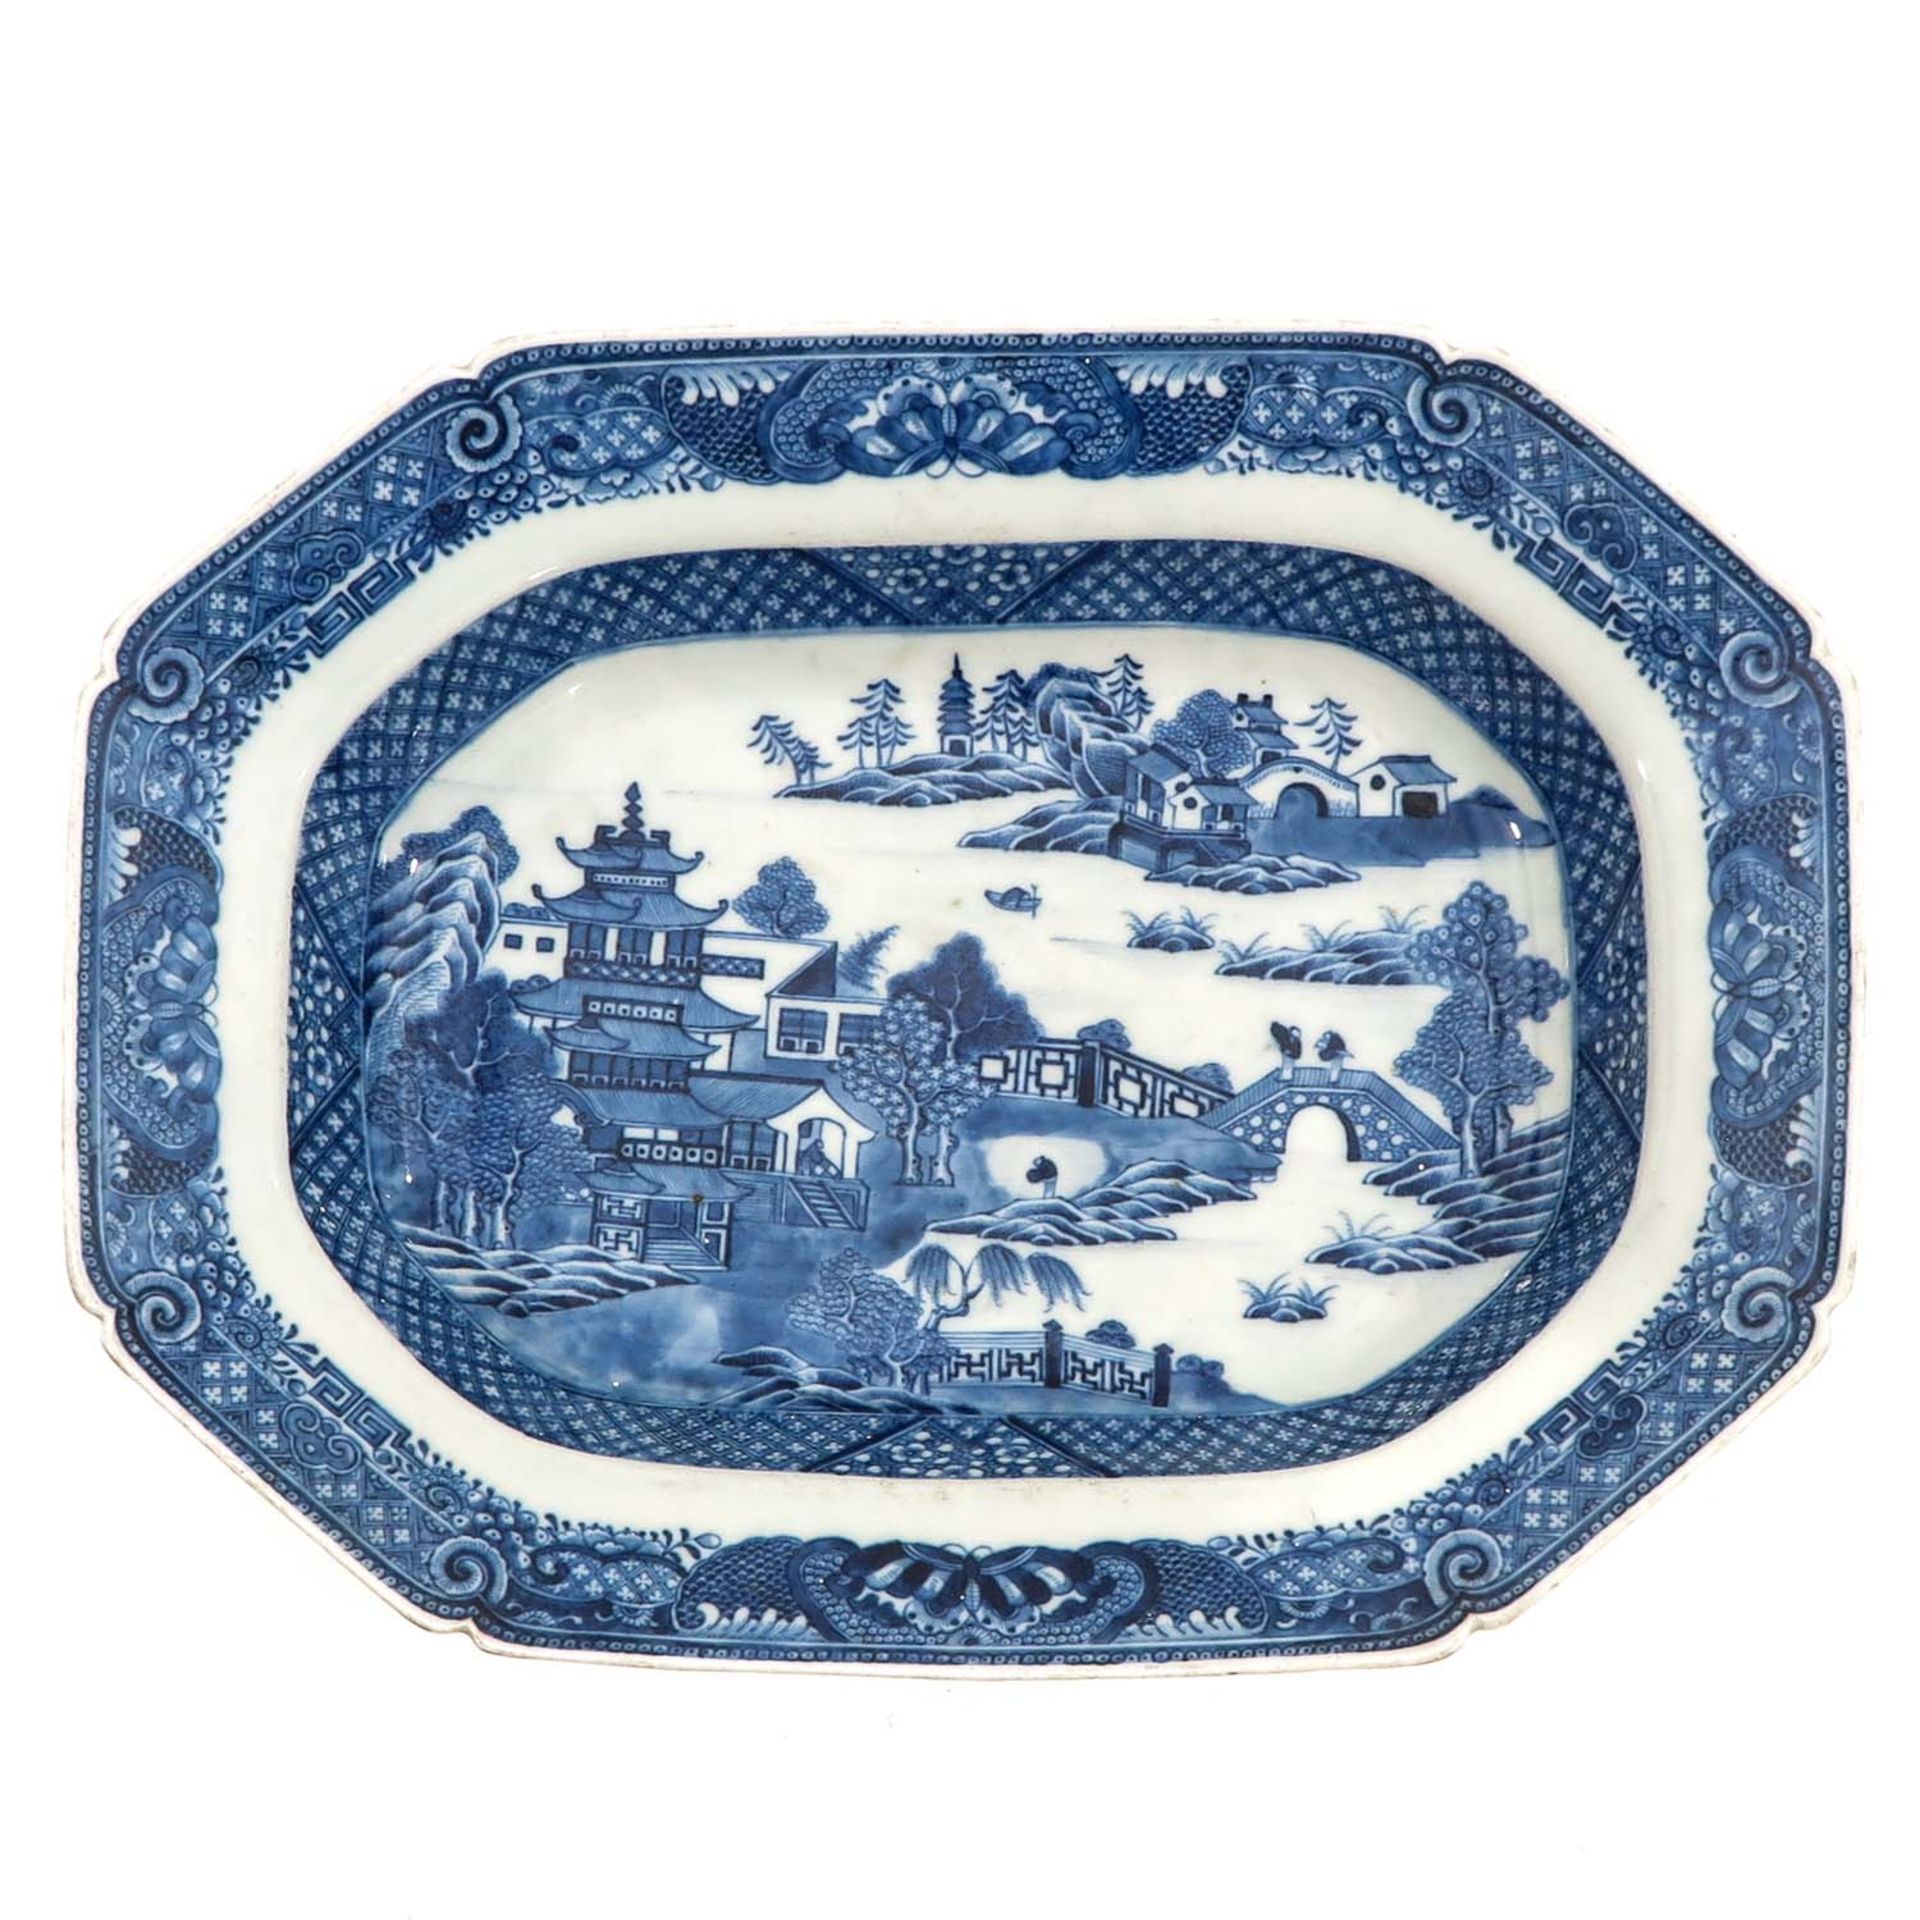 A Blue and White Serving Tray